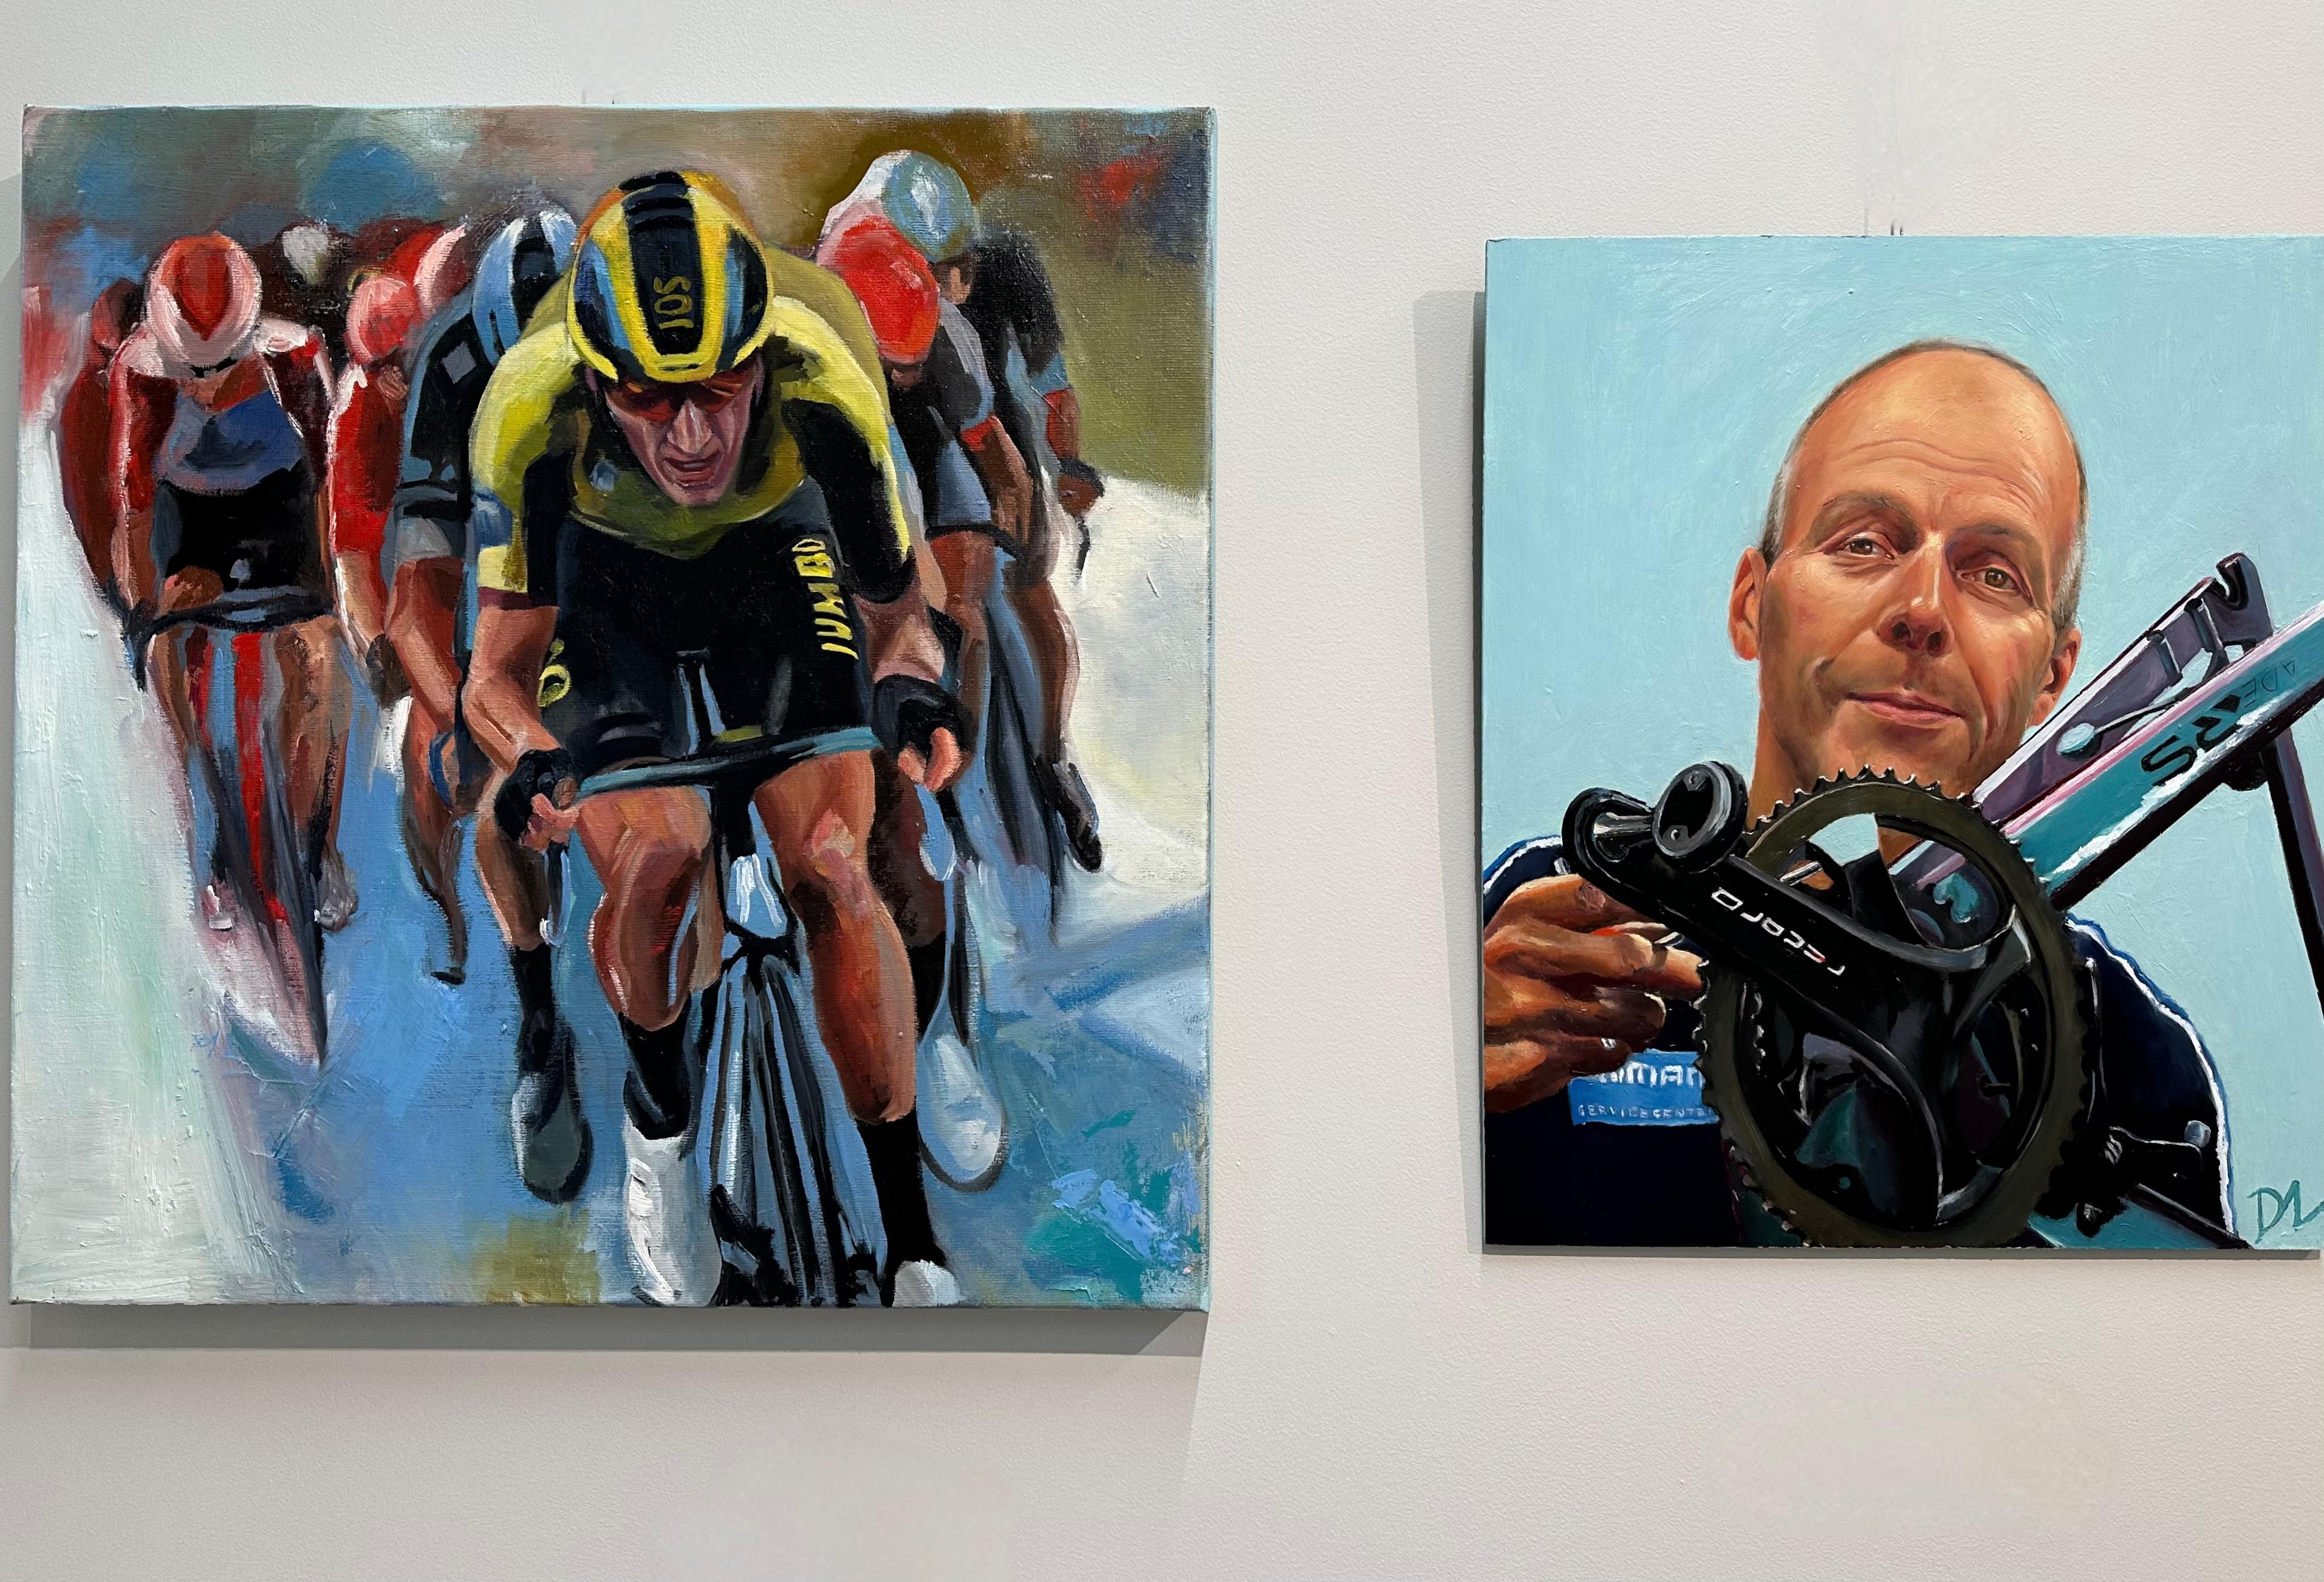 In the Lead- 21st Century contemporary painting of a cycling peloton - Painting by David van der Linden